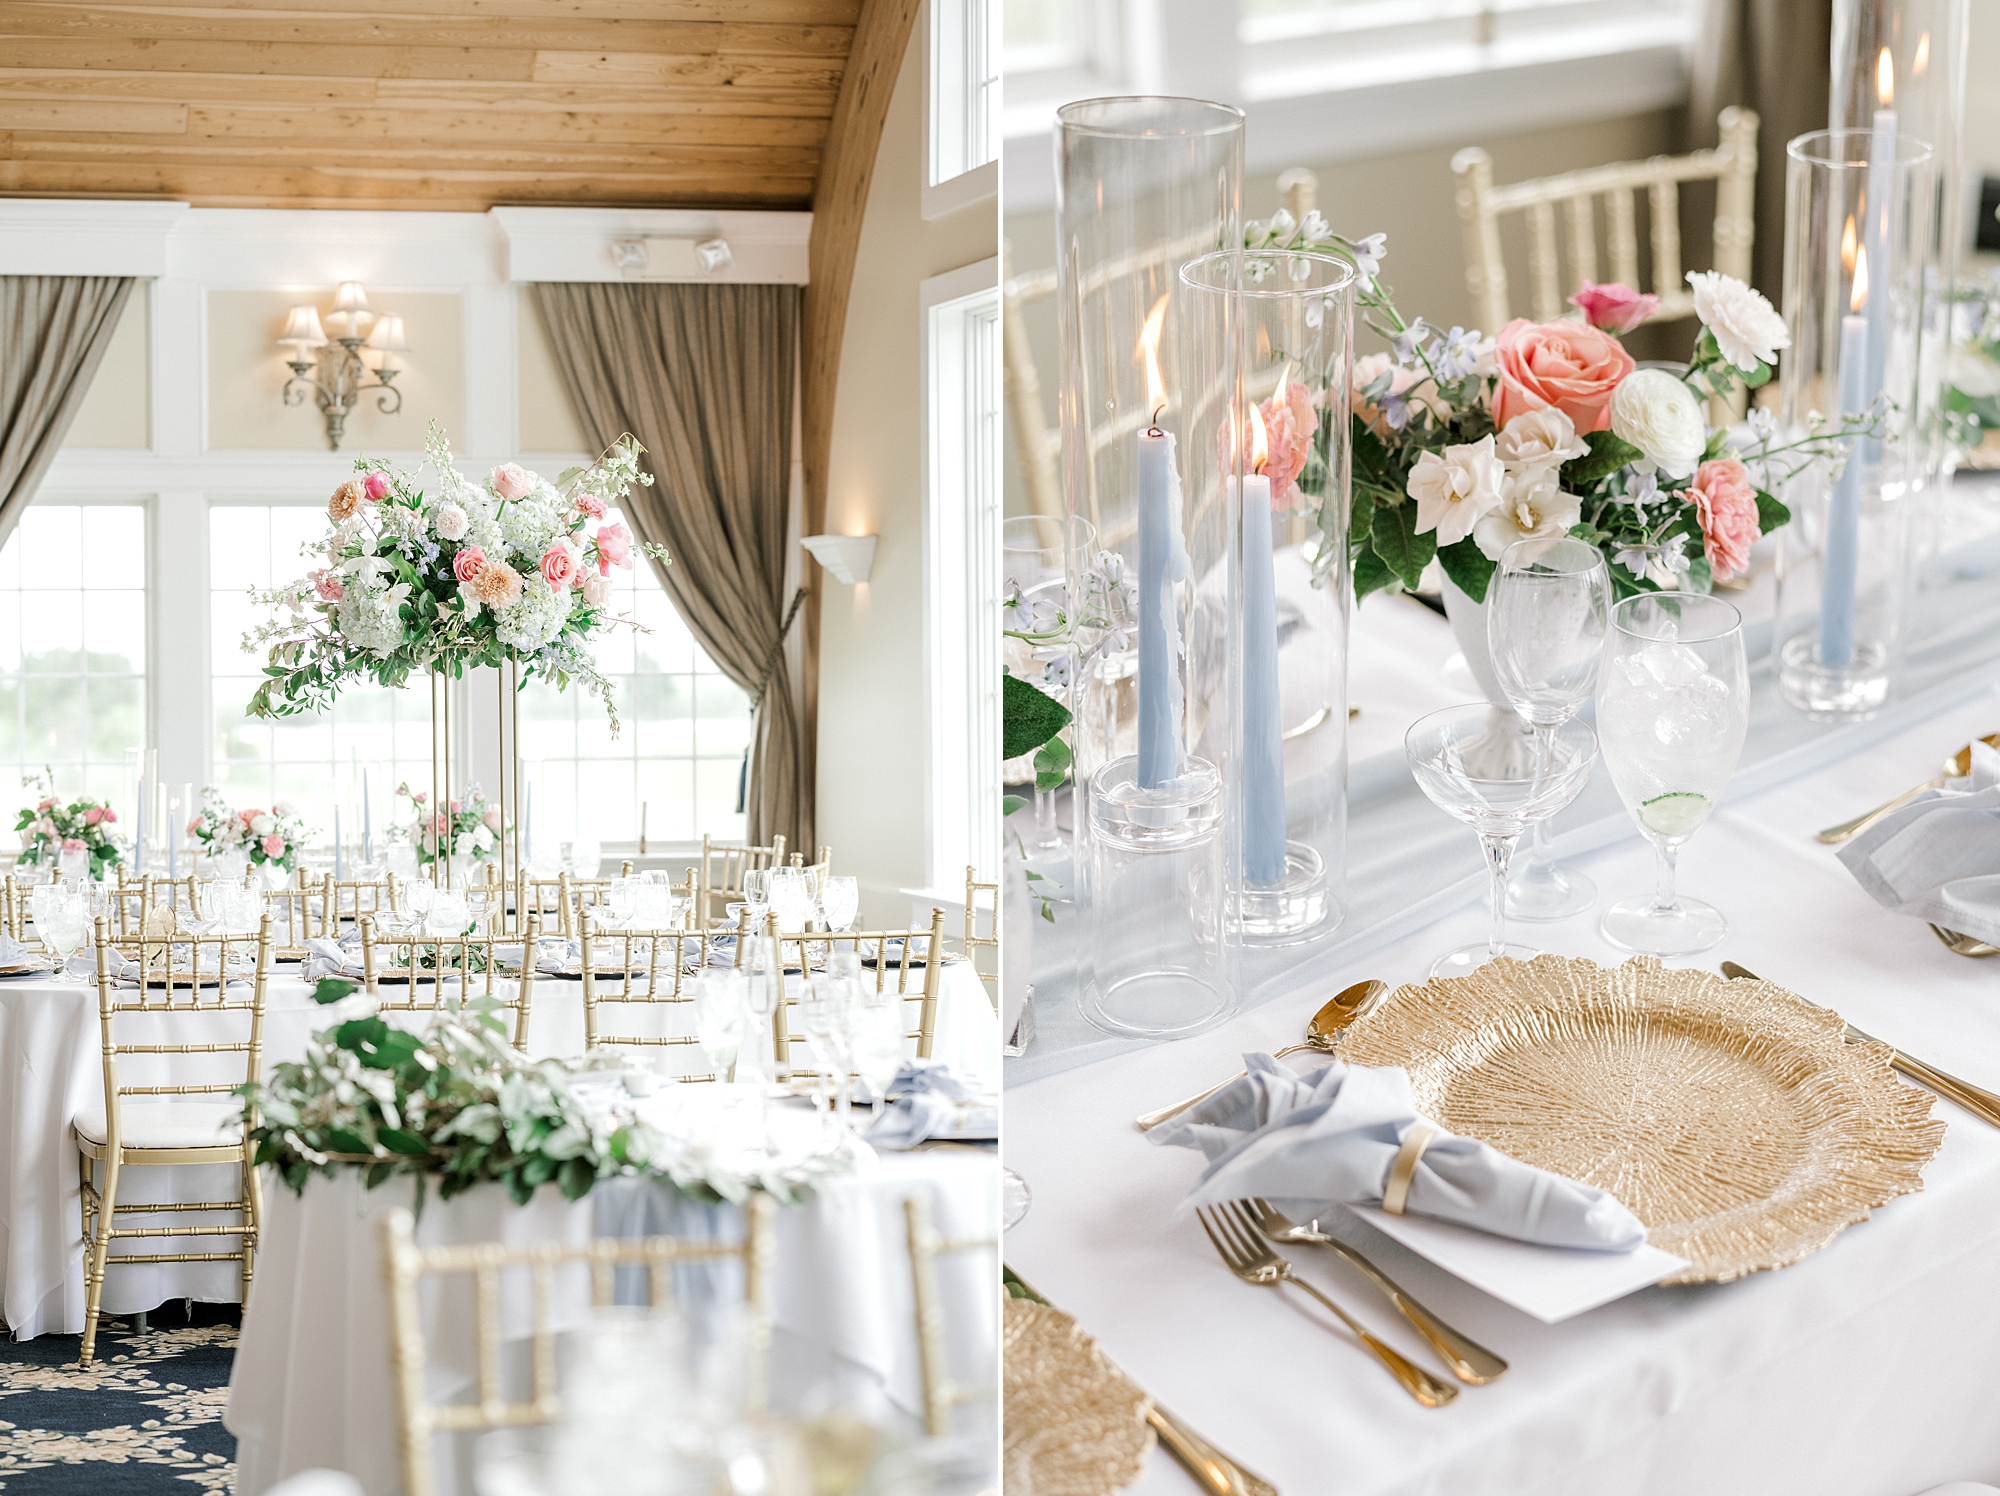 Bonnet Island Estate wedding reception with gold and blue details